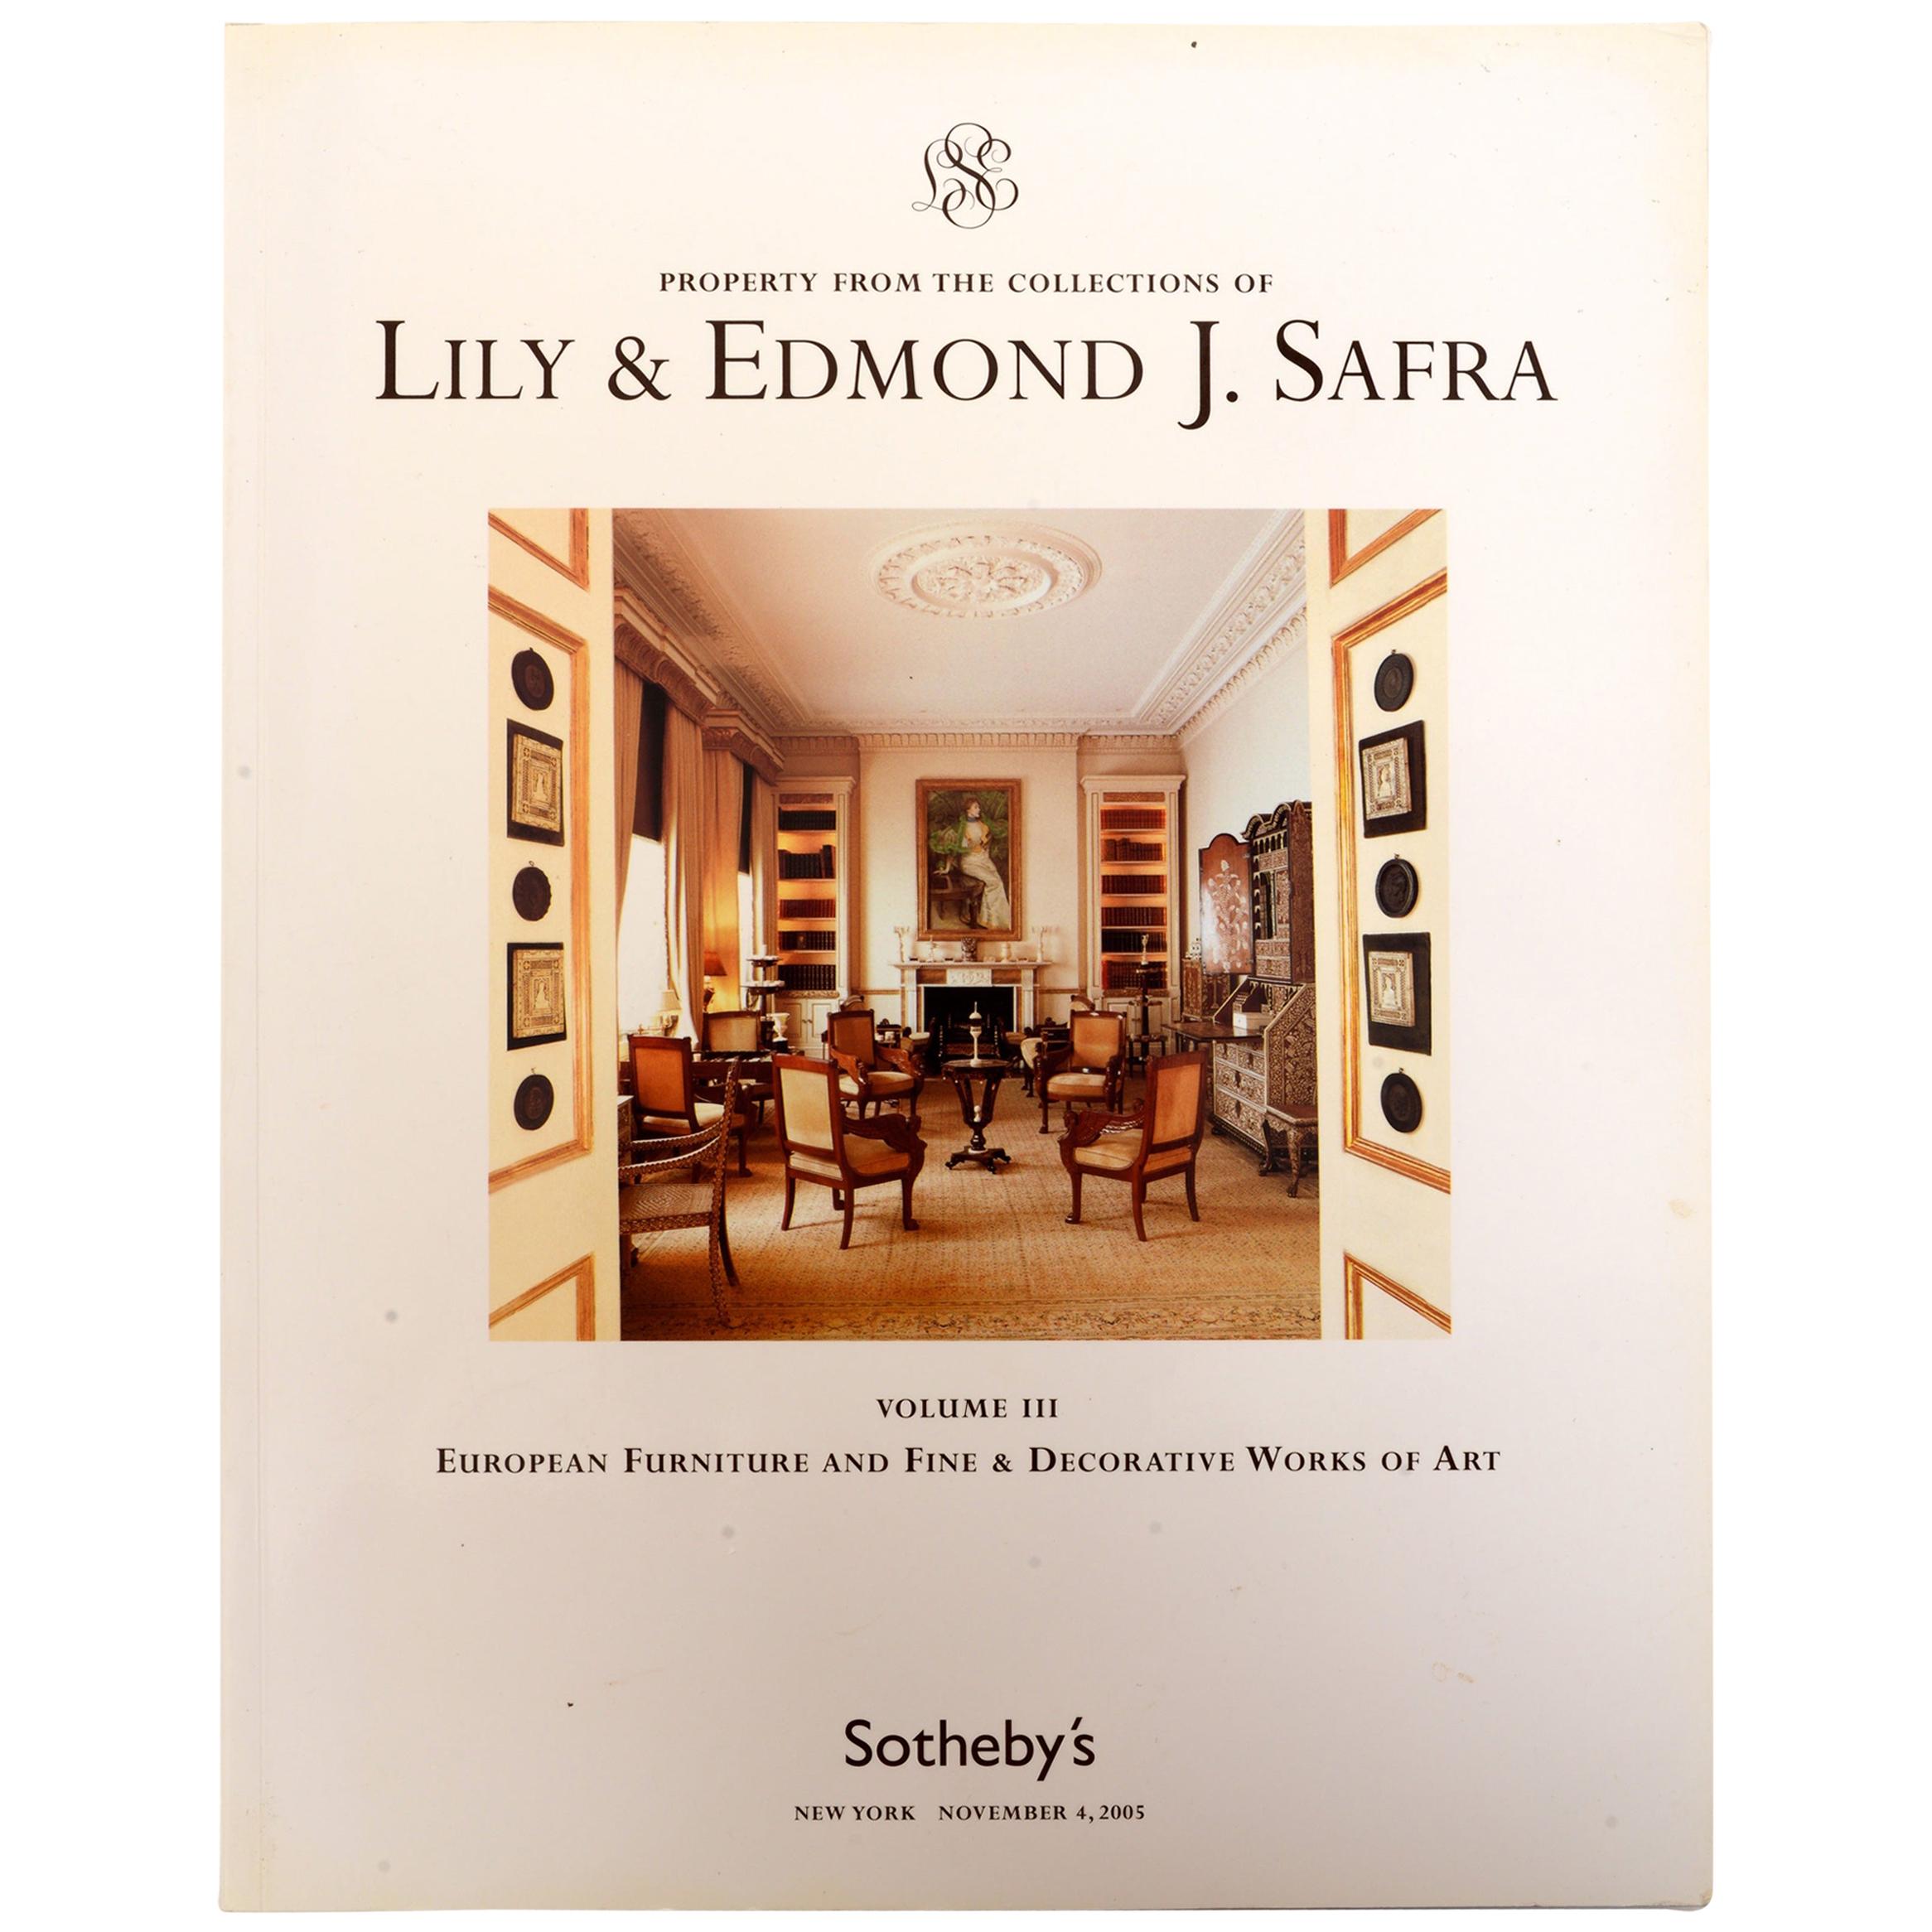 Sotheby's NY Property From the Collections of Lily & Edmond J. Safra, Vol. III